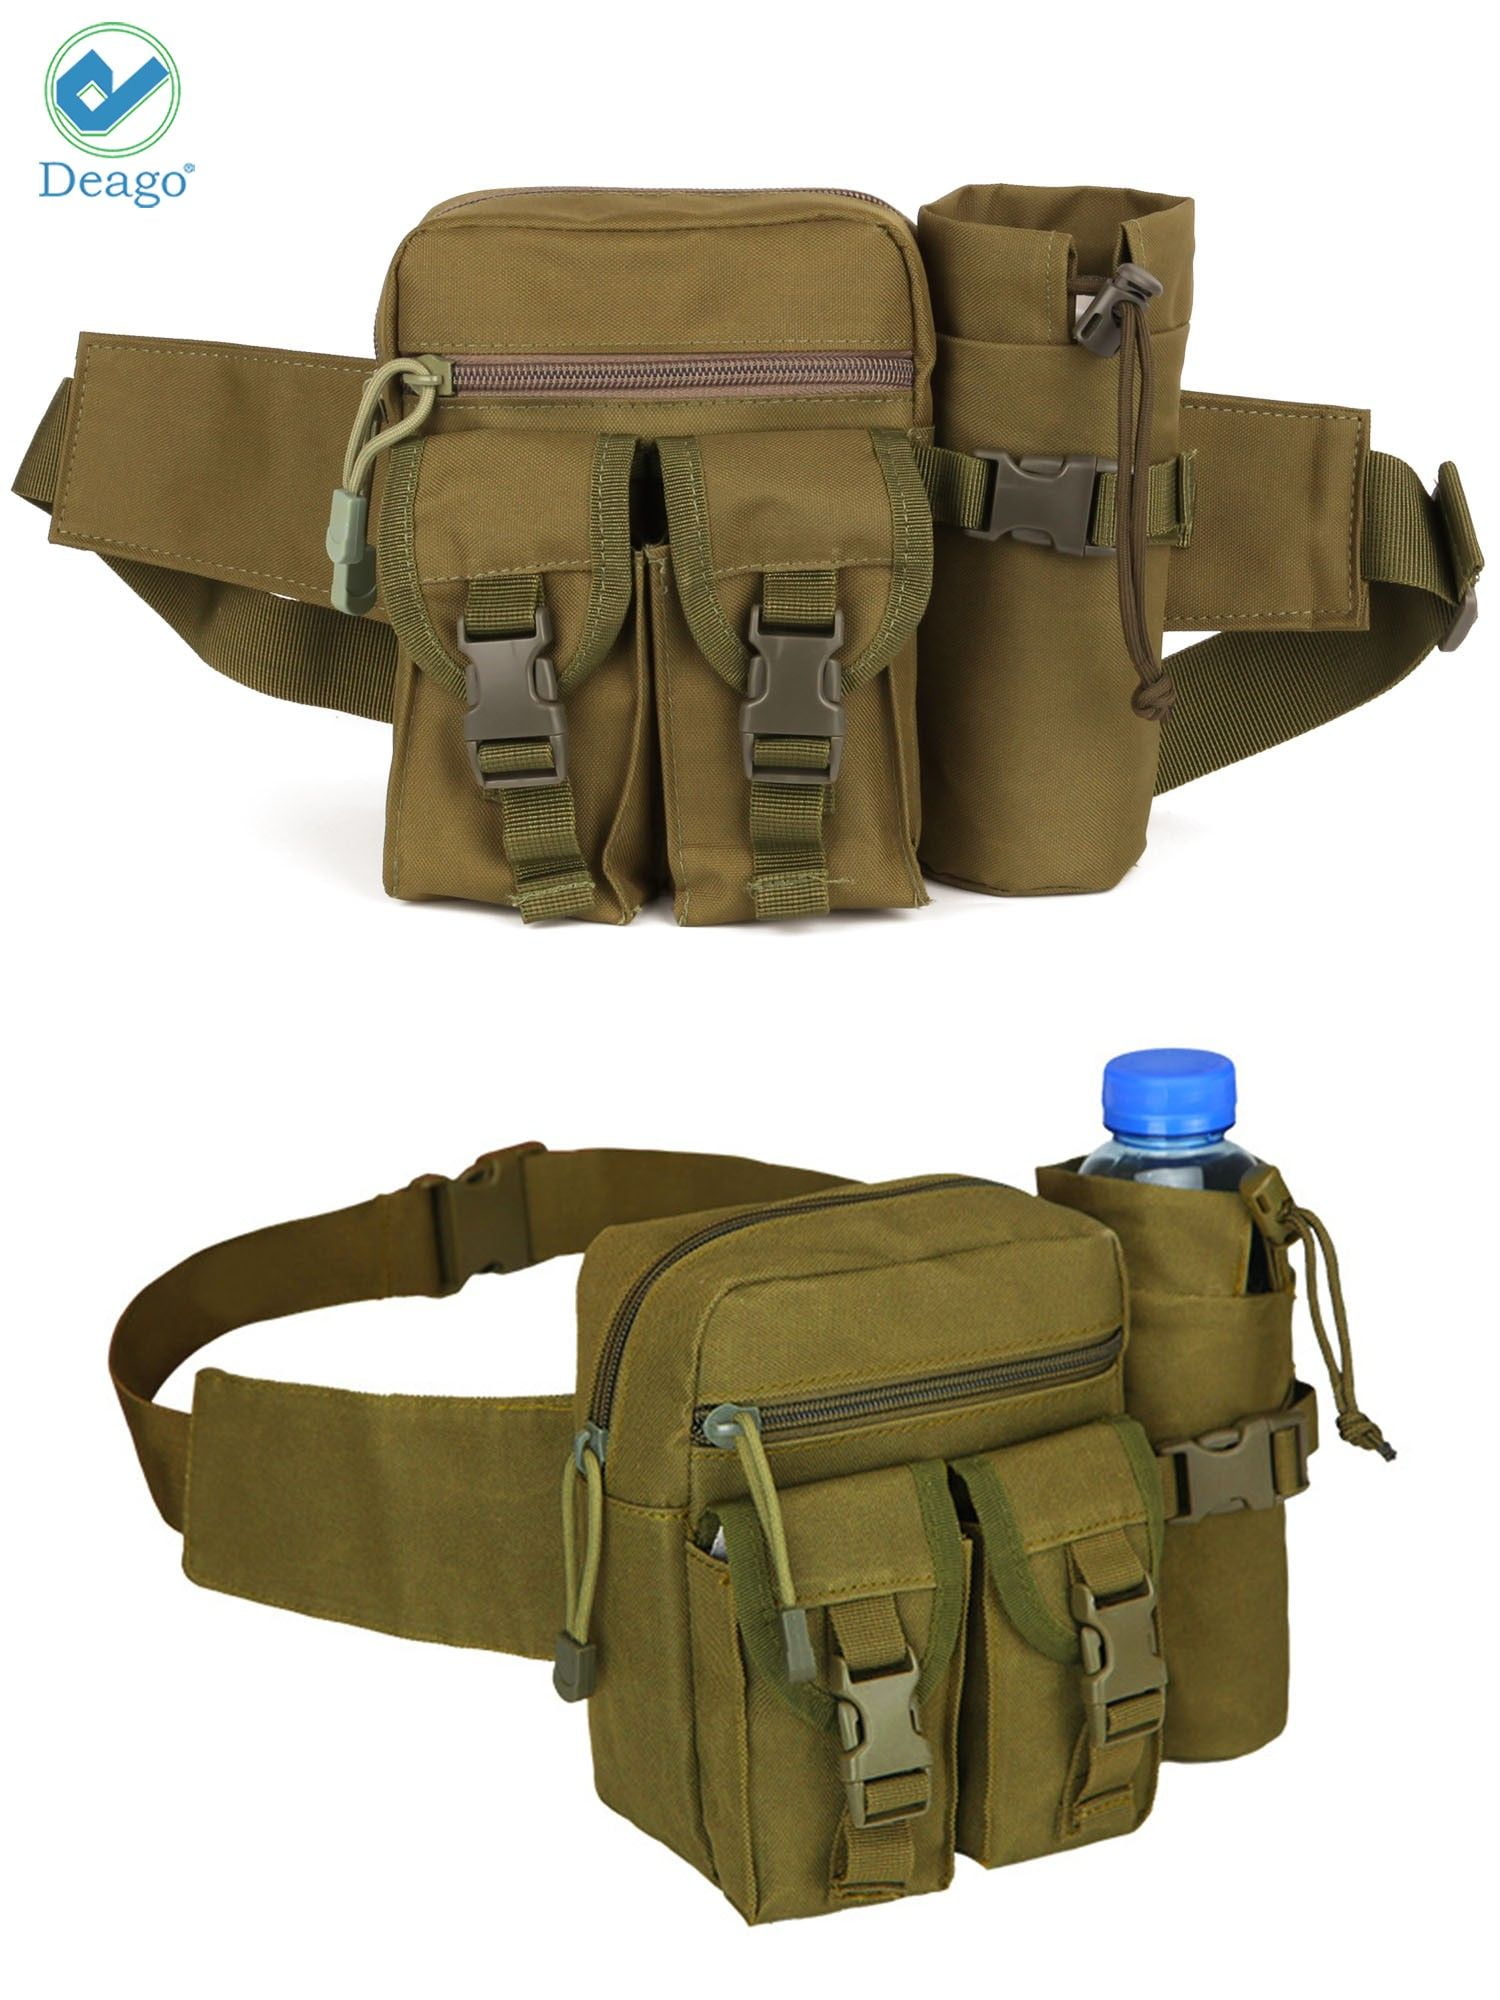 Outdoor Waterproof Camping Hiking Travel Military Waist Belt Pack Army Pouch Bag 